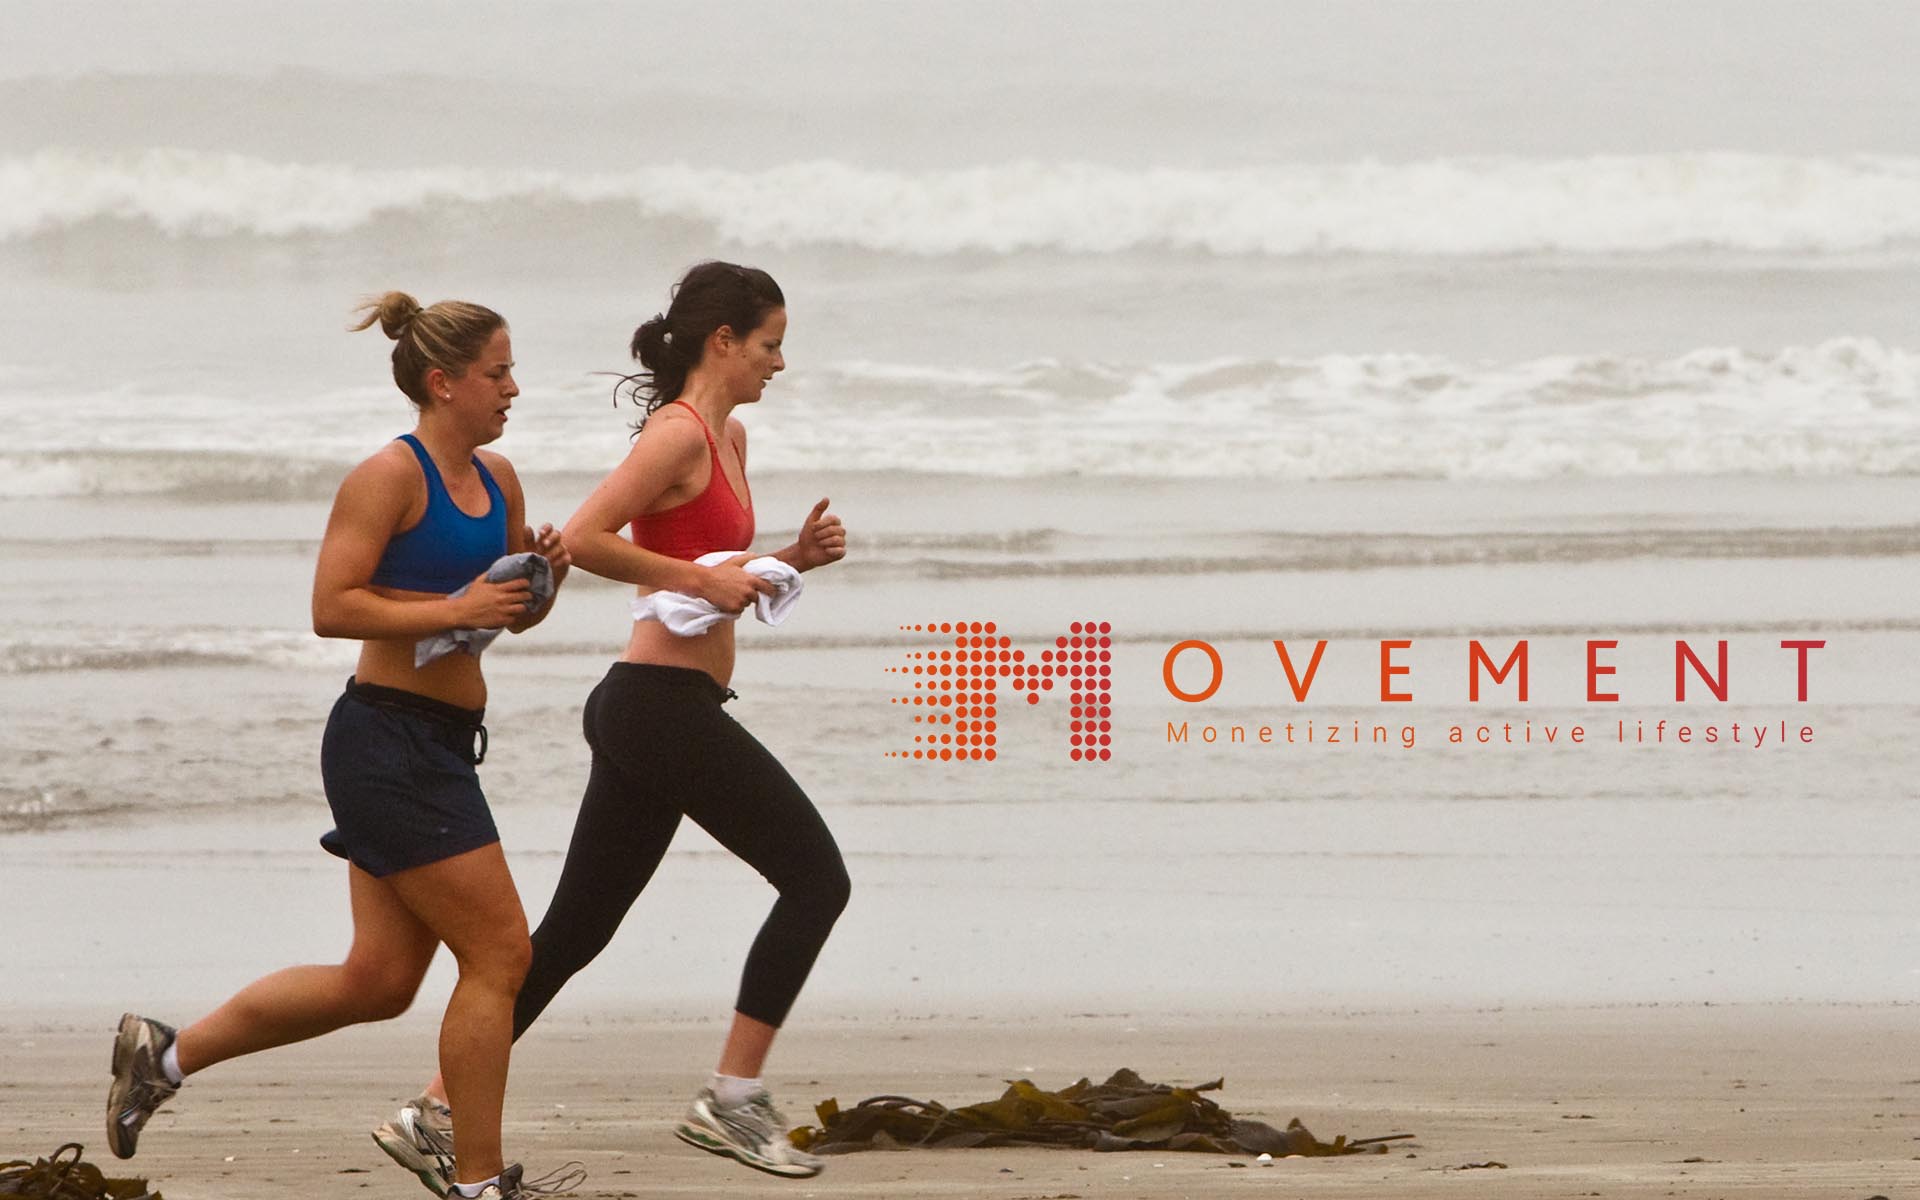 Movement App – Revolutionary Ecosystem that Rewards Users for Physical Activity